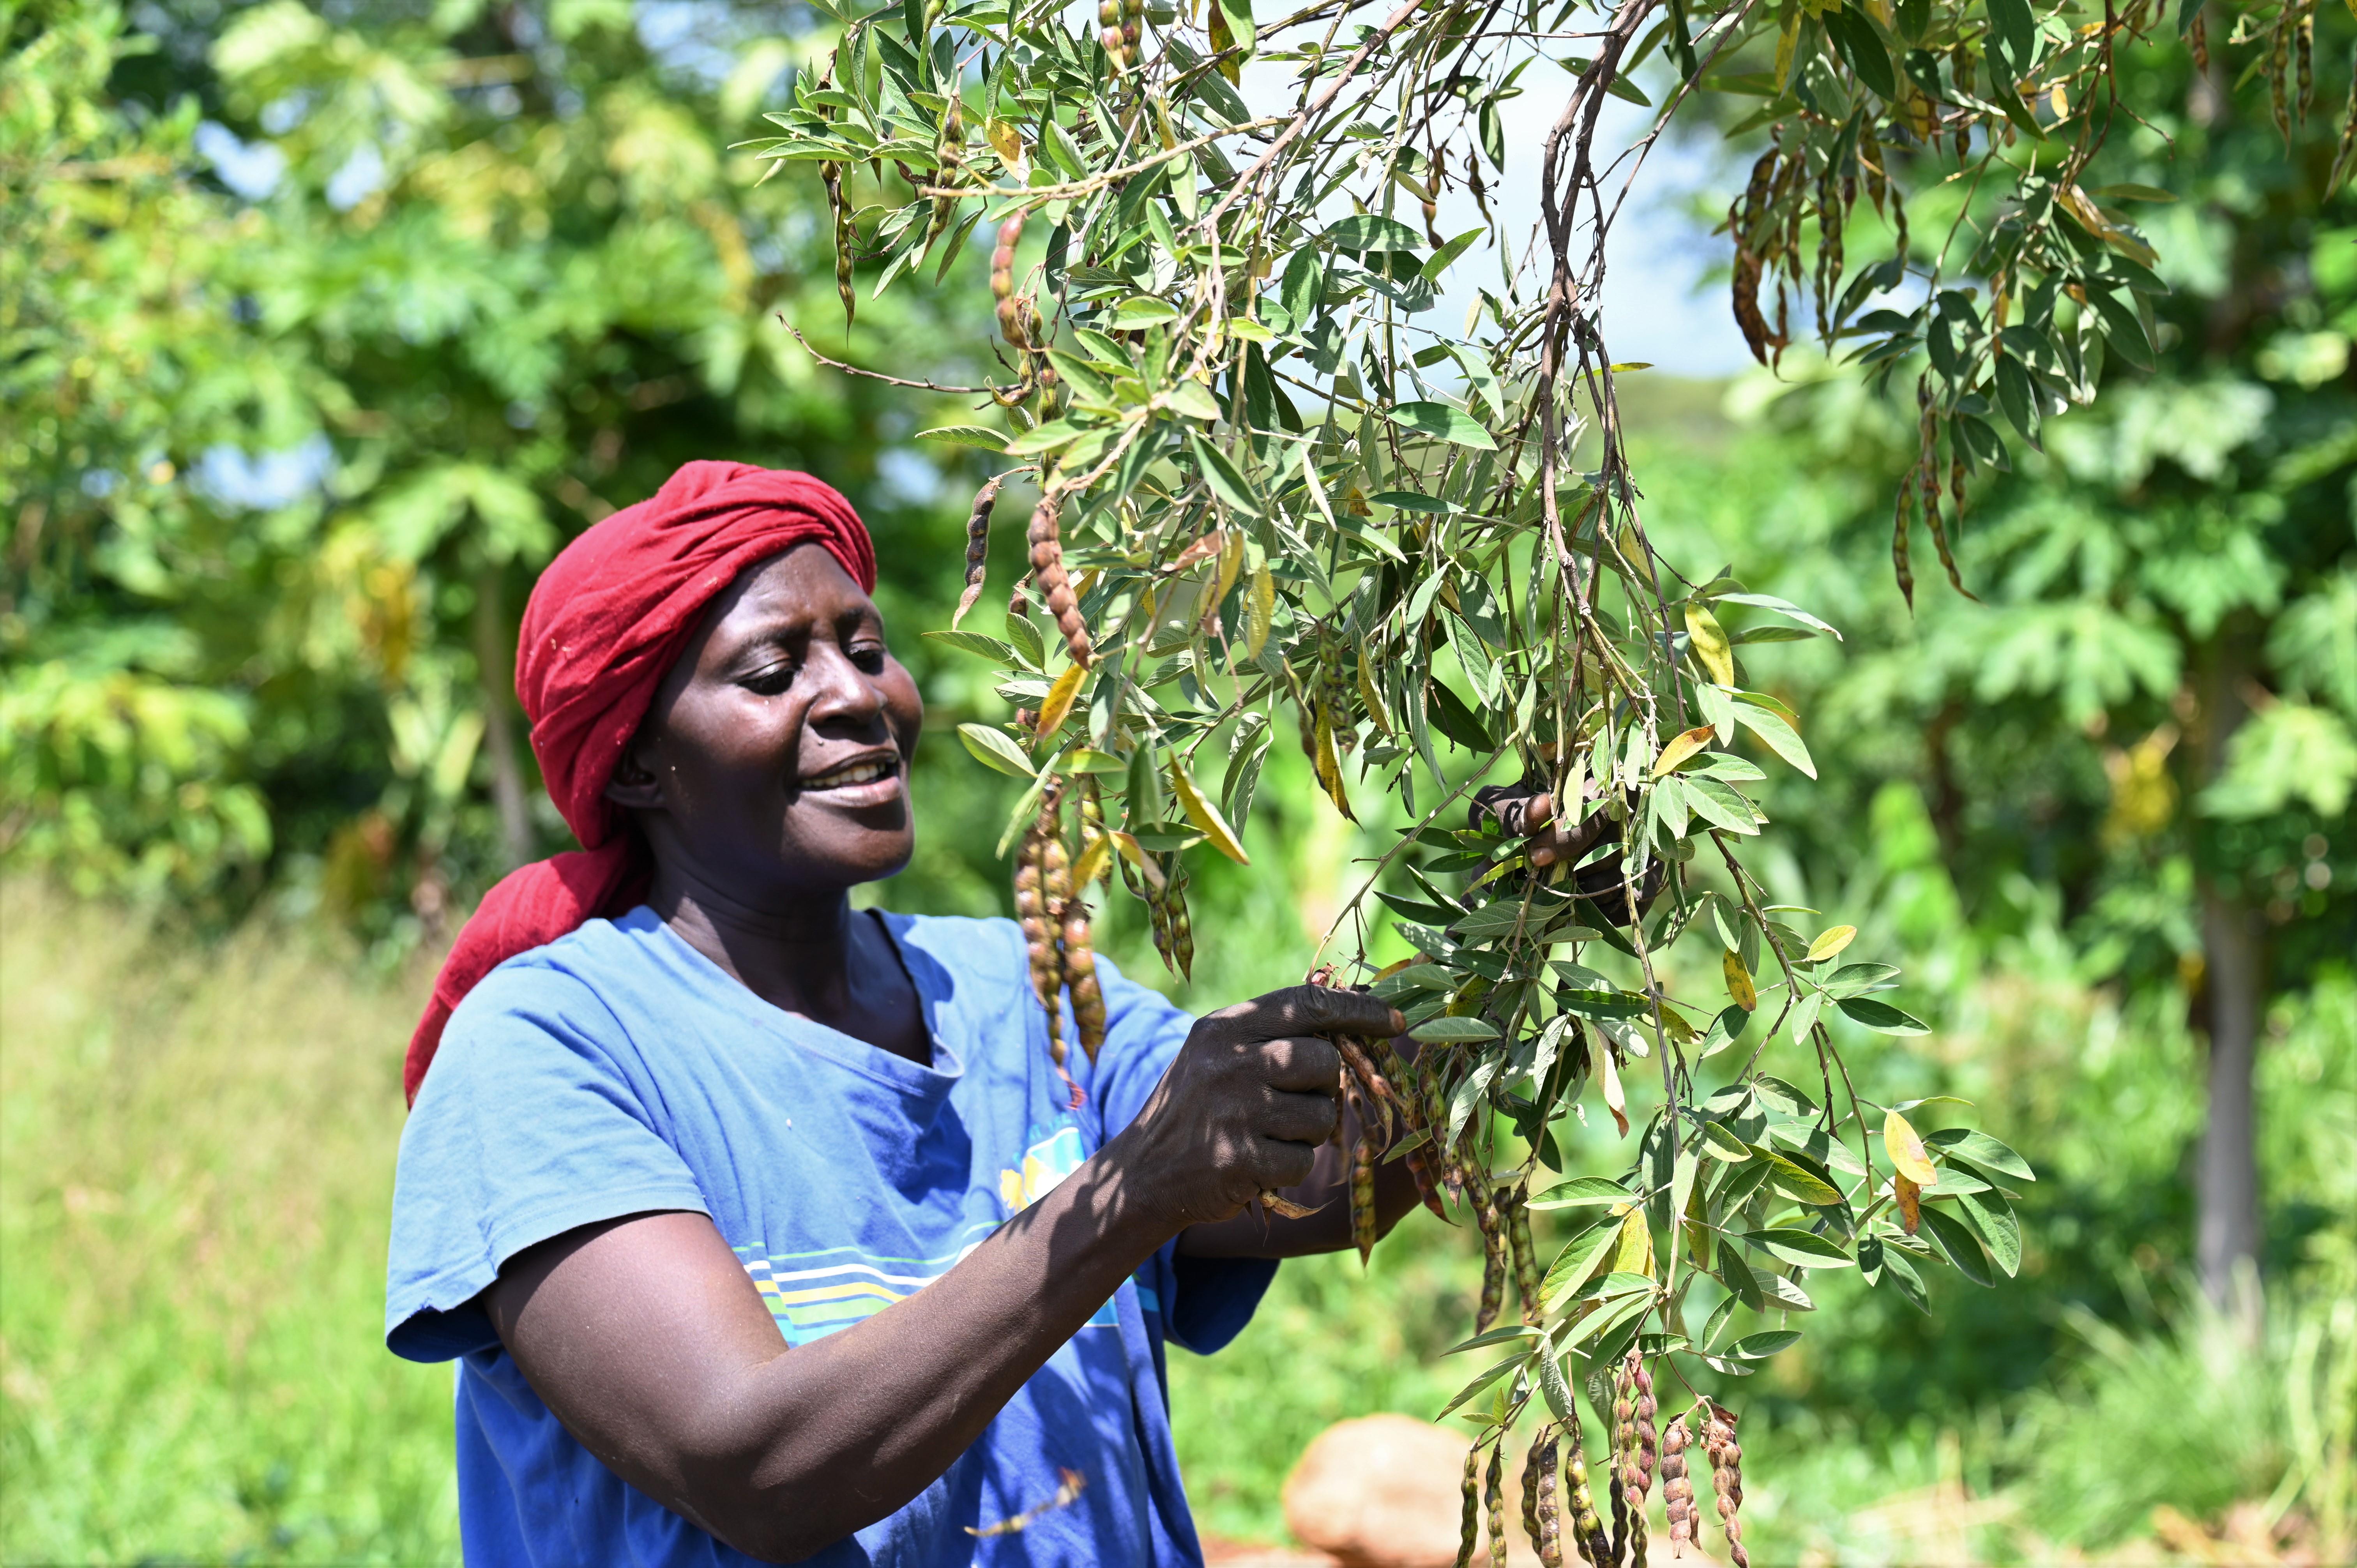 Joyce picking pigeon peas.  This is one among the many drought resistant crops on their farm. Considering Elgeyo Marakwet County frequently experiences drought, such crops cushion the family during dry seasons. ©World Vision Photo/ Hellen Owuor